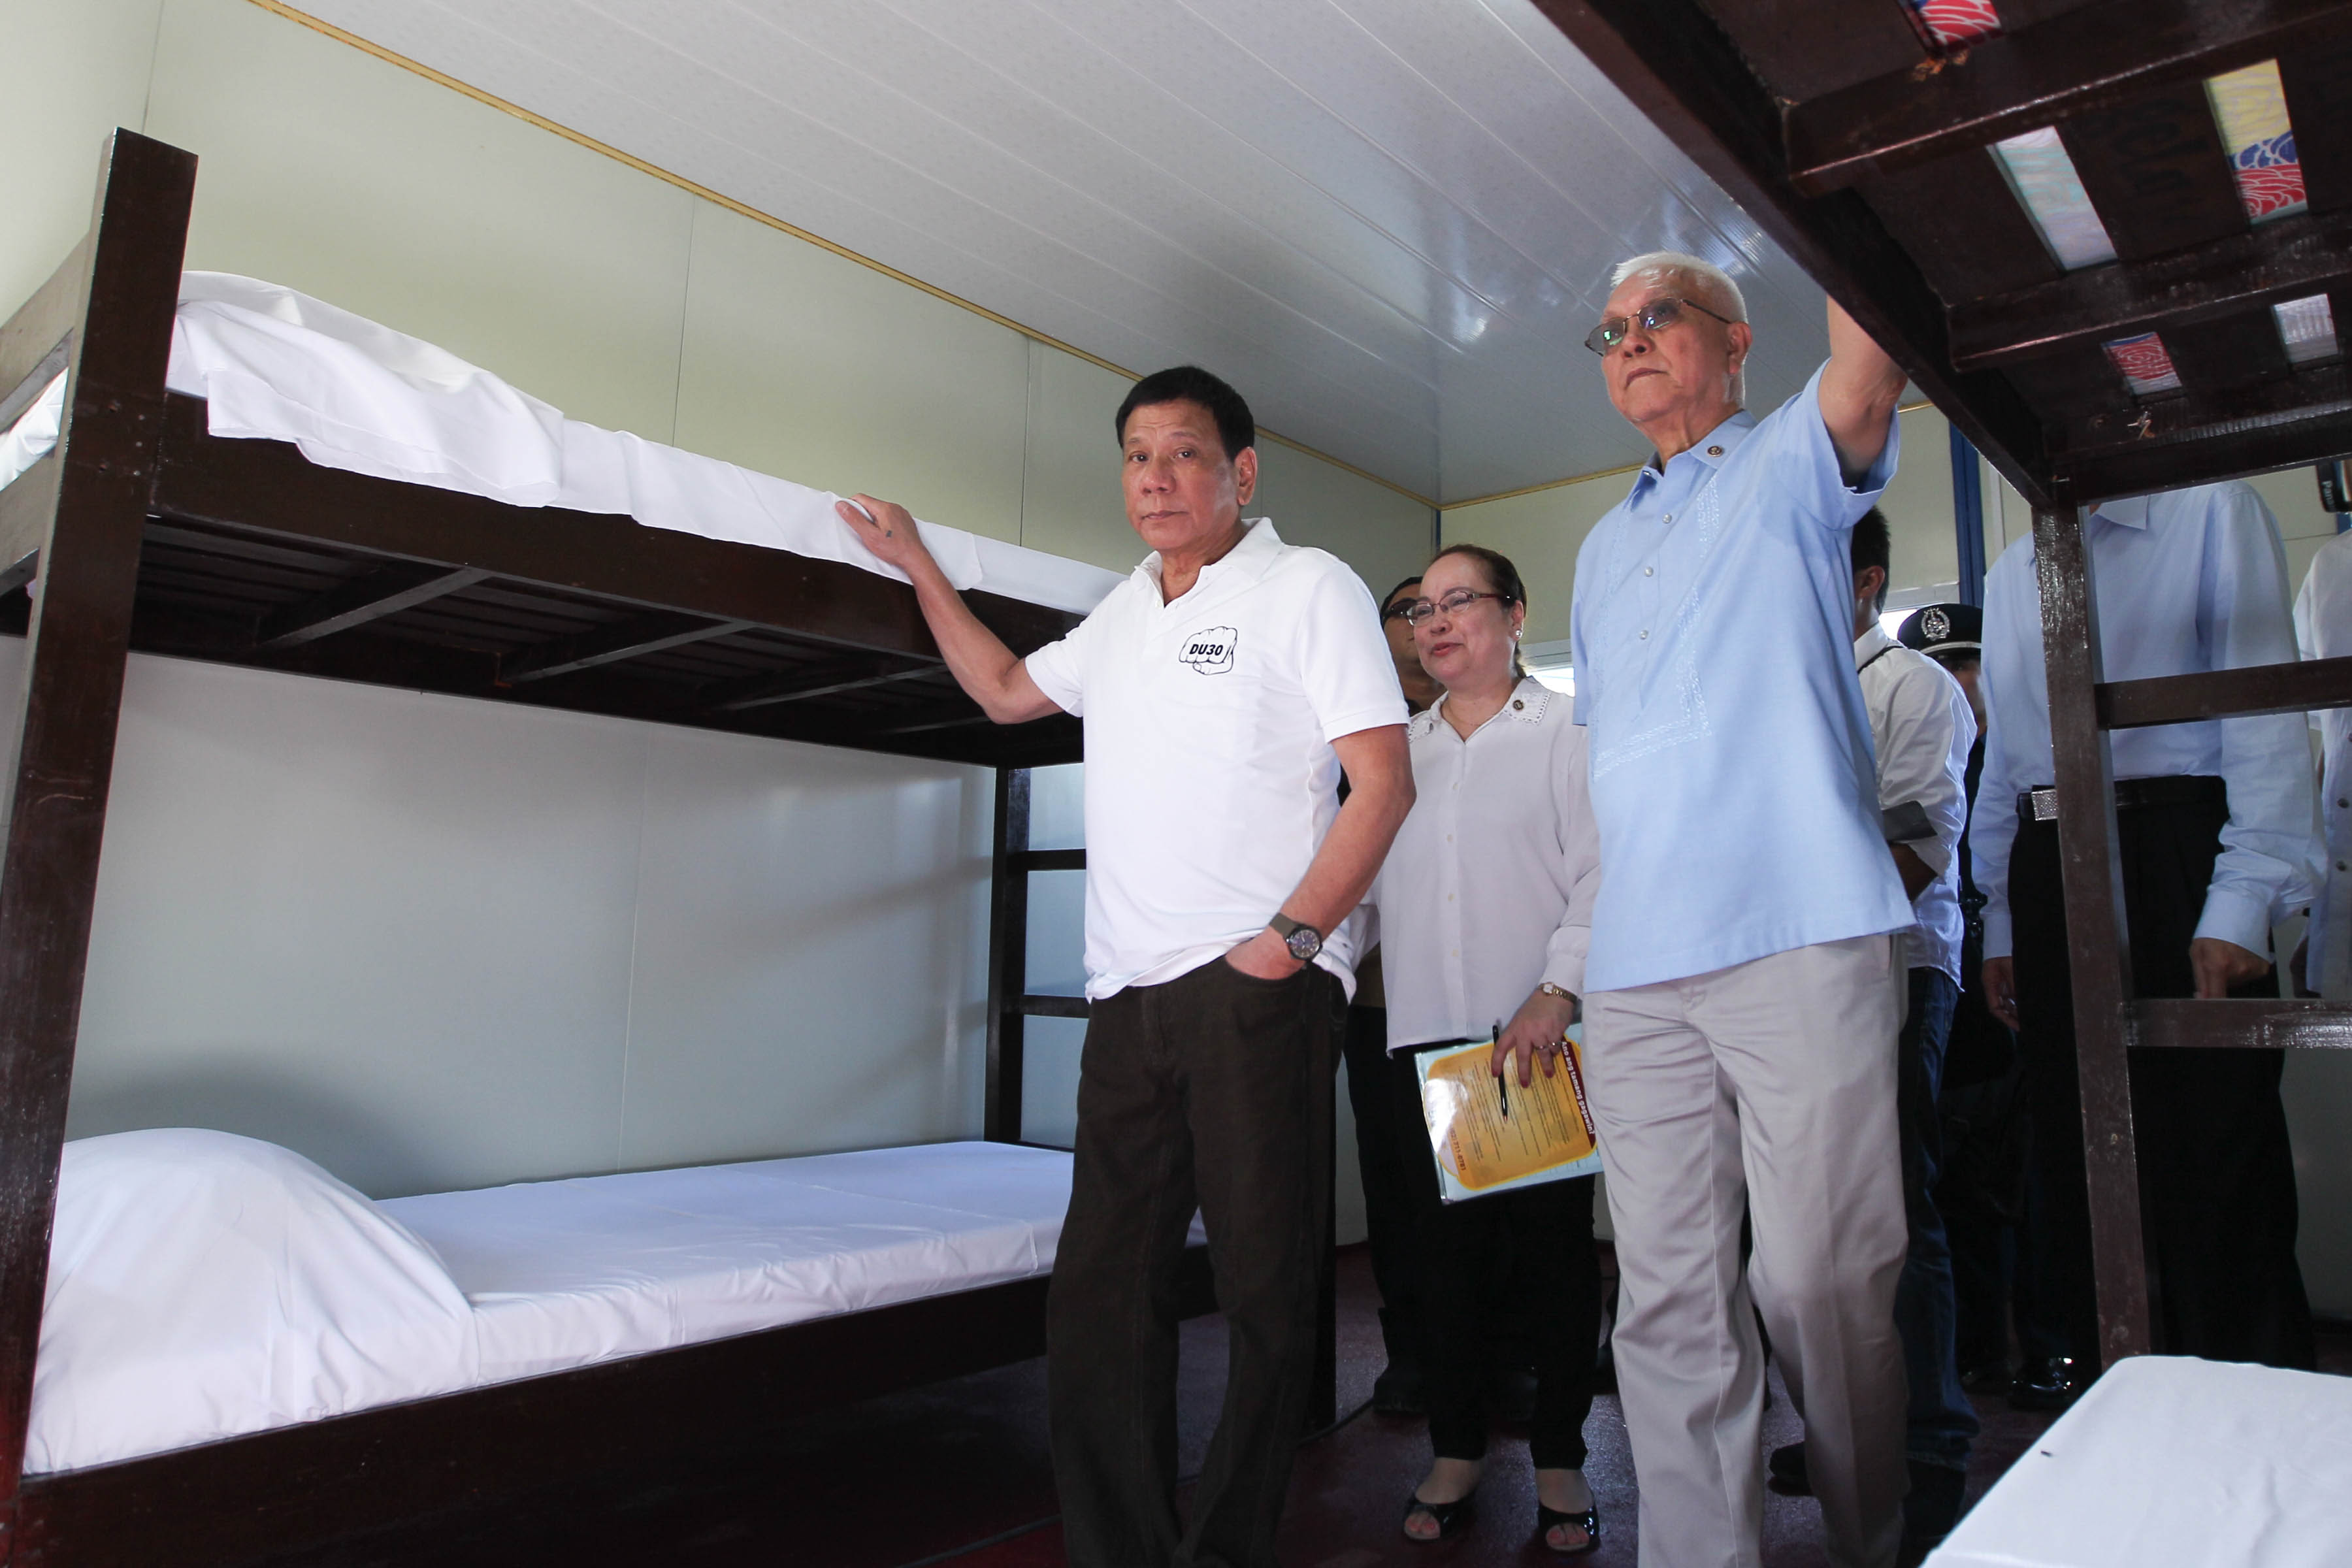 INSPECTION. Cabinet Secretary Jun Evasco accompanies President Duterte as he inspects a new drug rehabilitation facility in Nueva Ecija donated by Chinese tycoon Huang Rulun. Photo by Ace Morandante/Presidential photo  